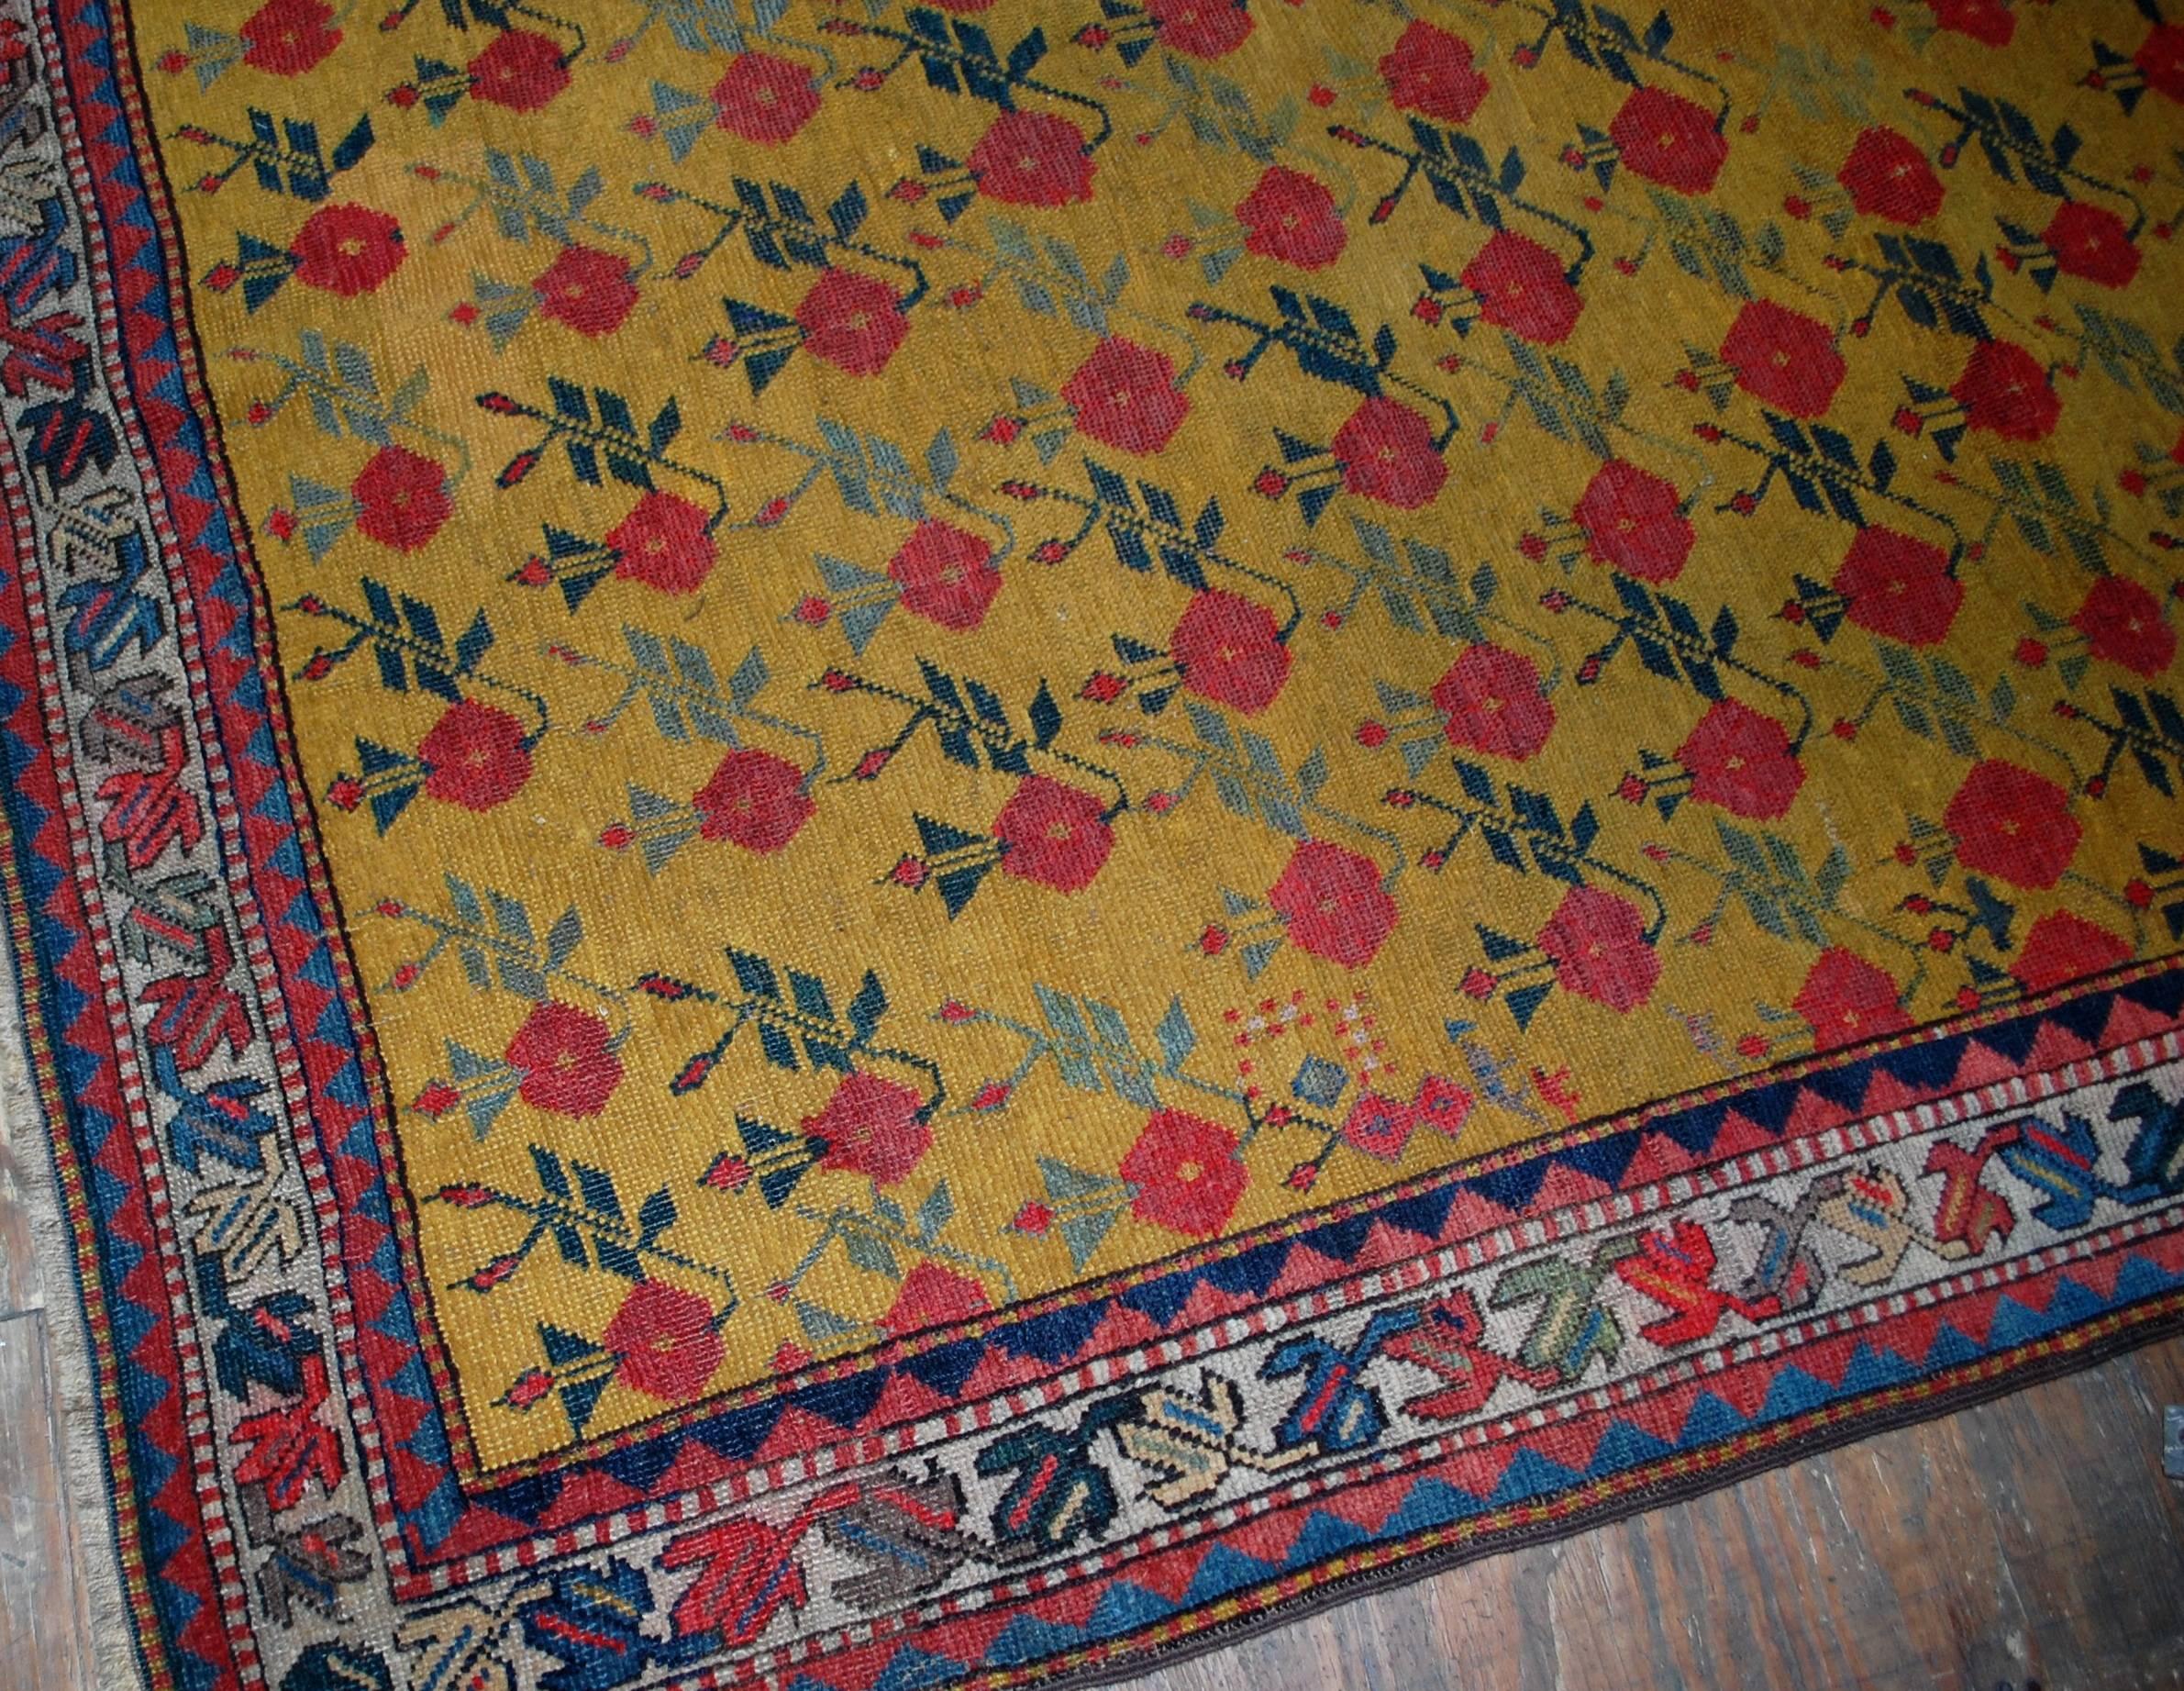 Antique handmade Russian Karabagh rug in great condition. The rug made in charming floral design on the all-over yellow background. The beautiful white border with national ornaments surrounding the central area. The rug could bring the shines and